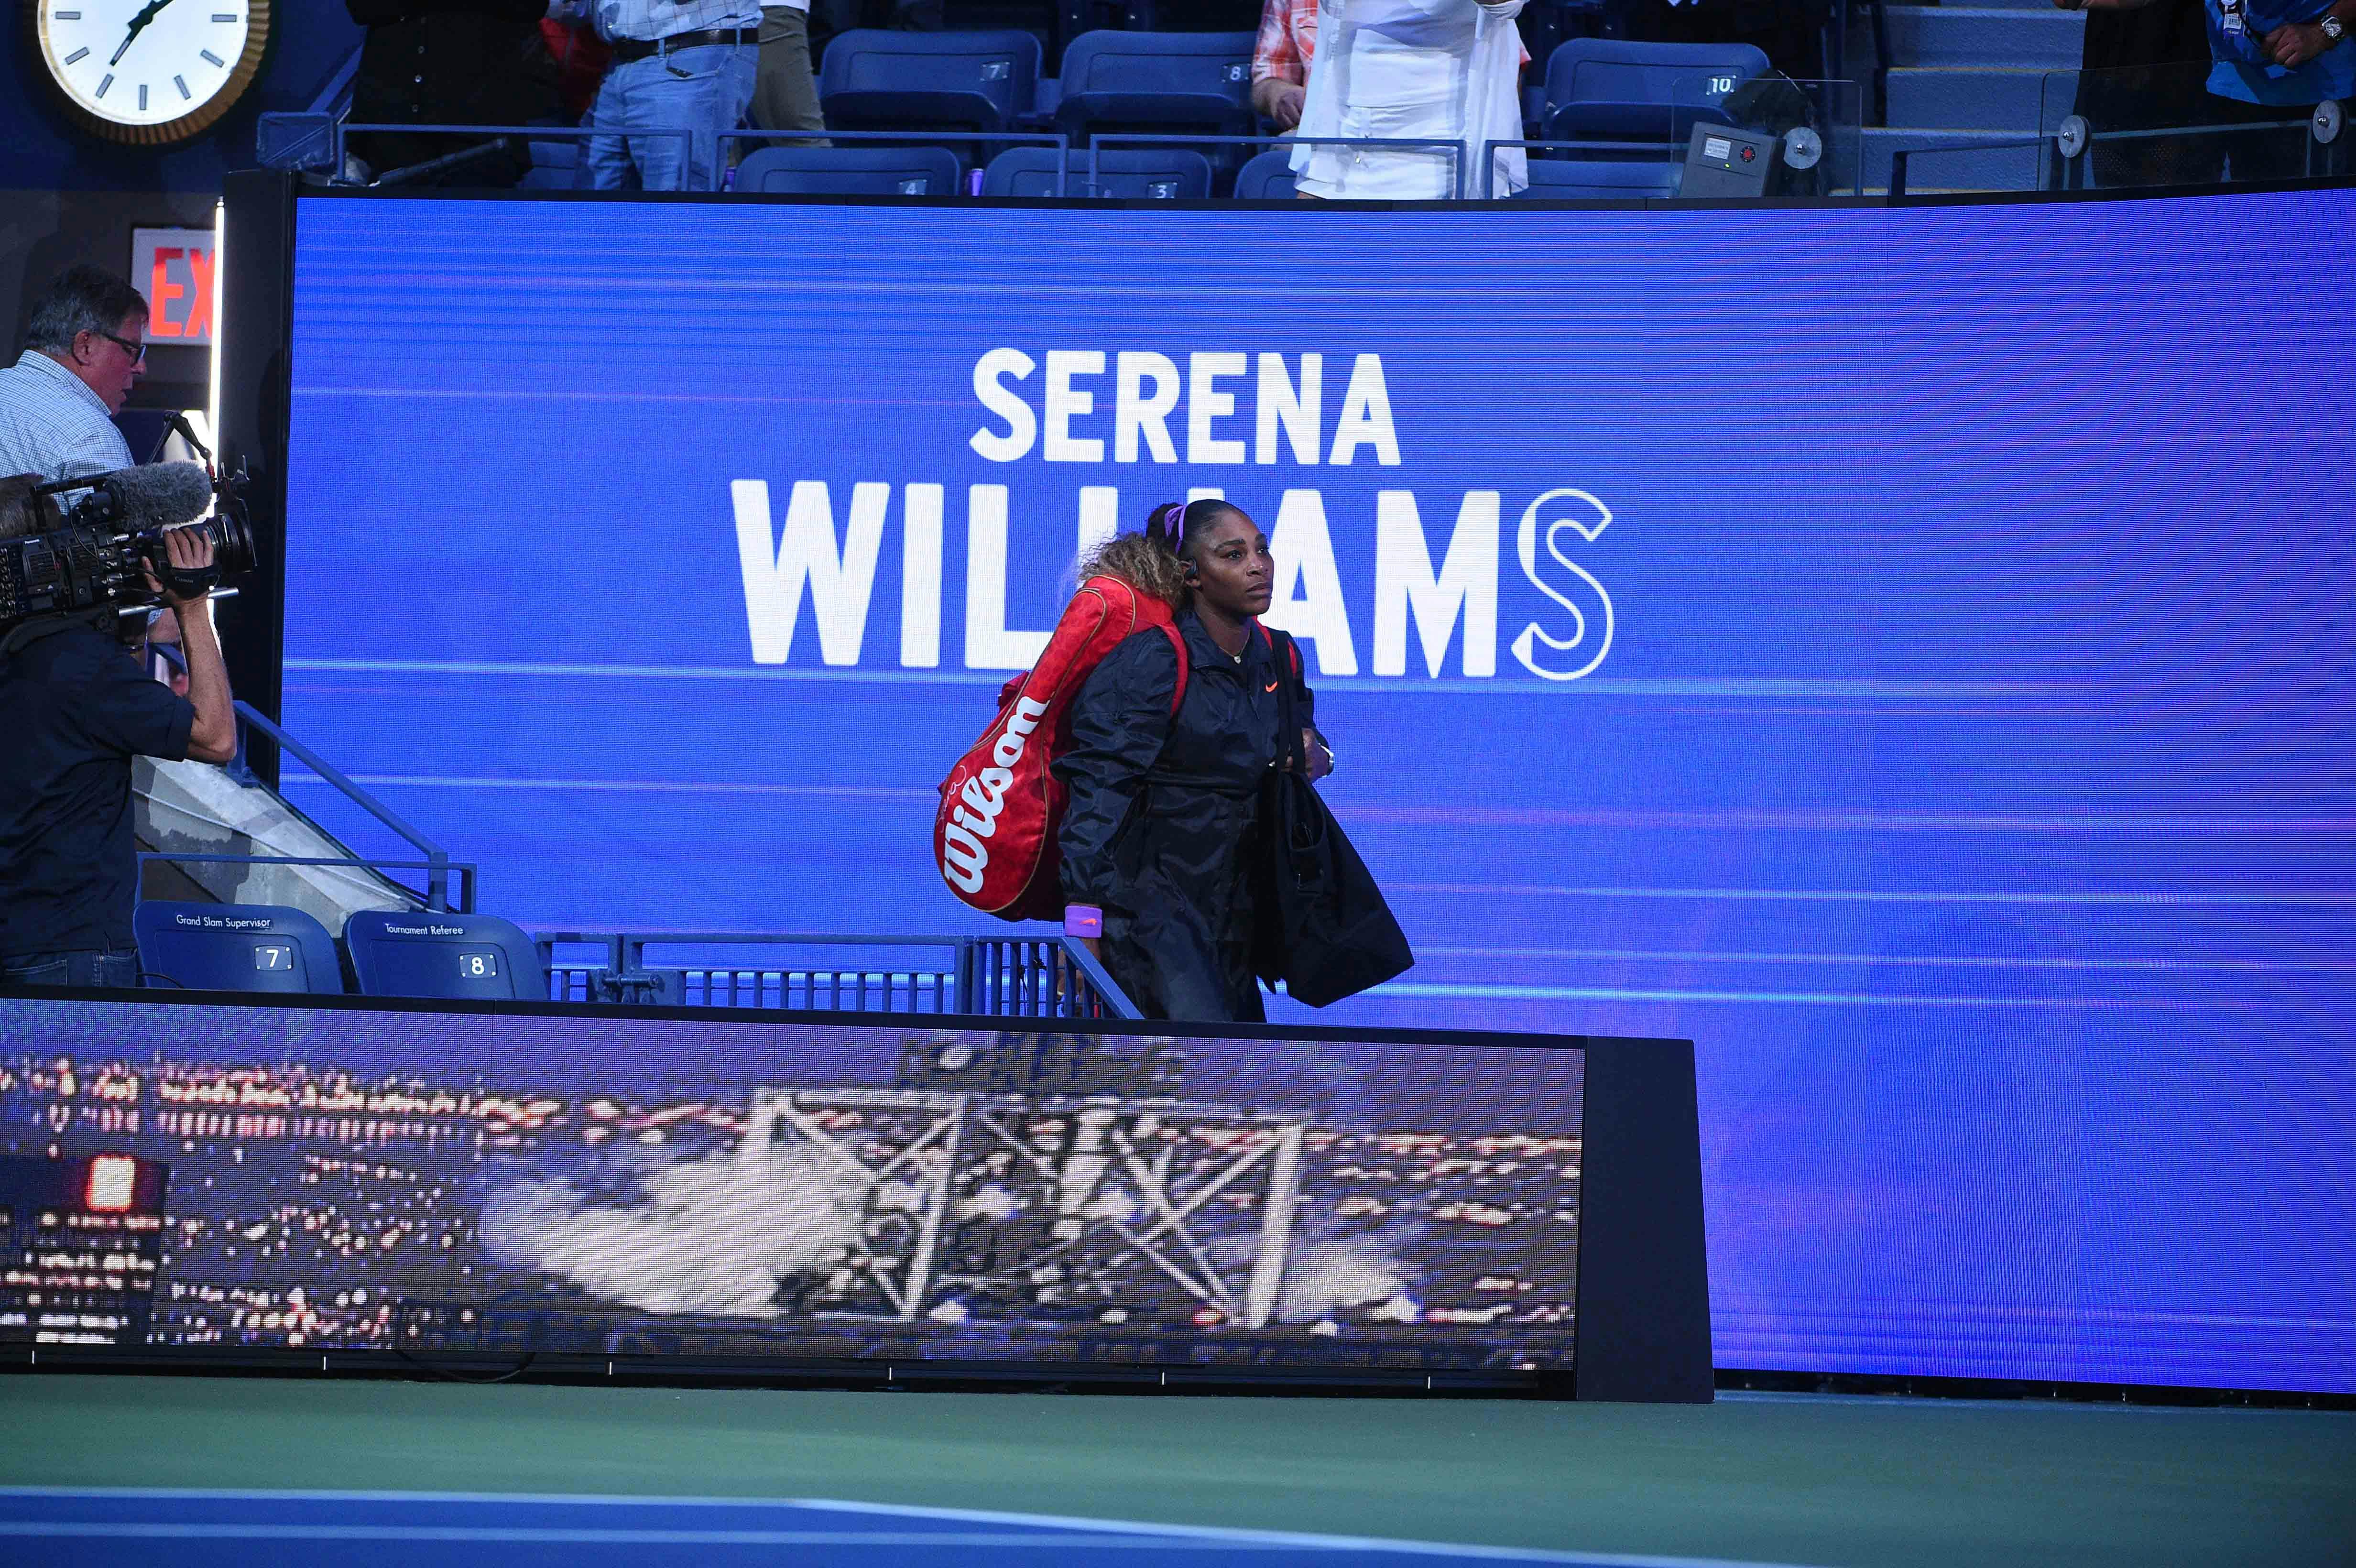 Serena Williams walking on the court at the 2019 US Open